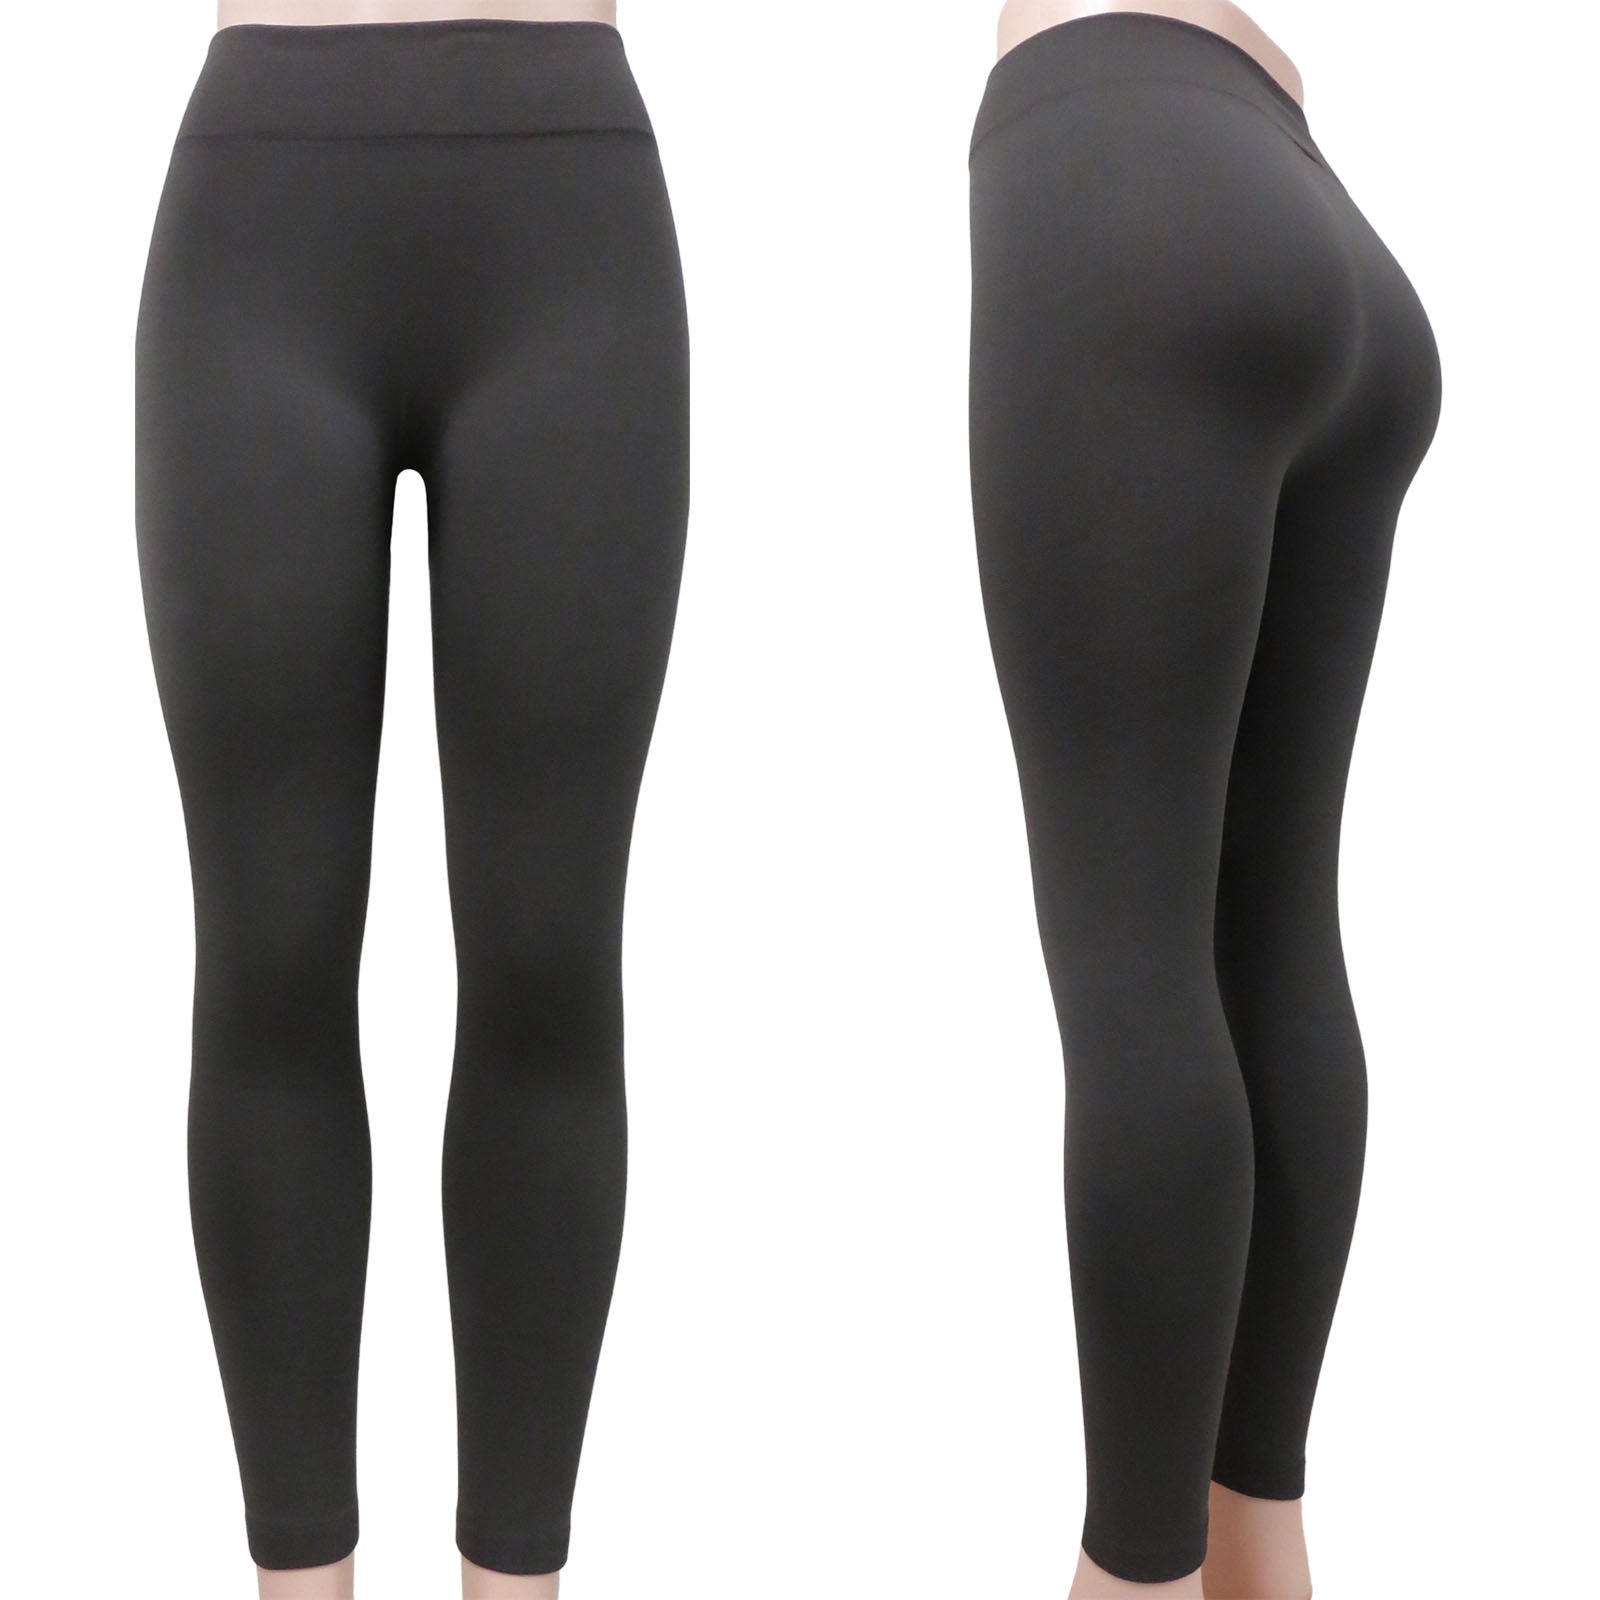 Go Colors Leggings Wholesale Price List | International Society of  Precision Agriculture